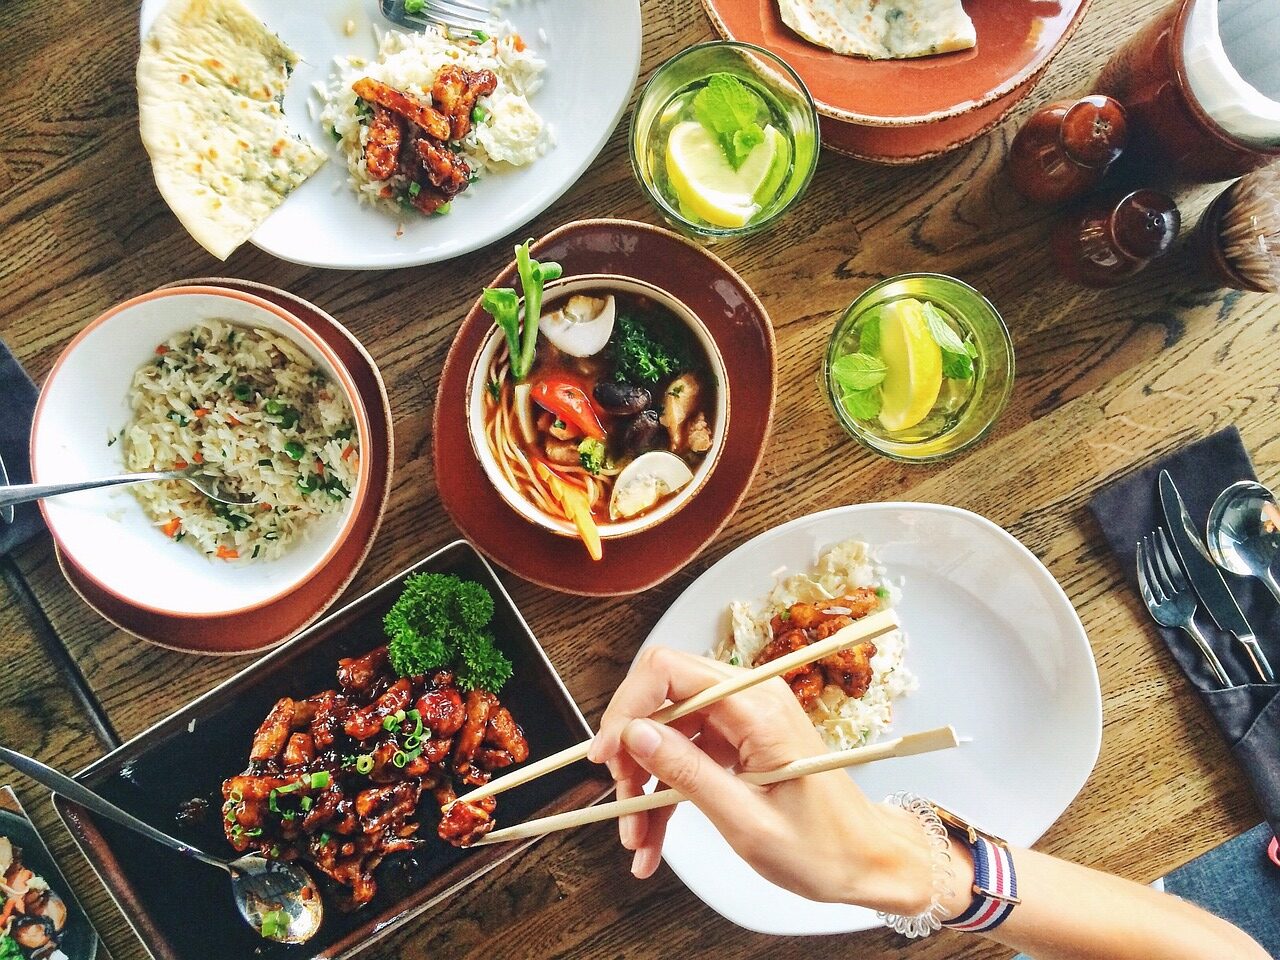 A hand holding chopsticks reaches for a plate of food while other plates adorn the table. Customer experience in the fast casual restaurant industry is about more than just the food.